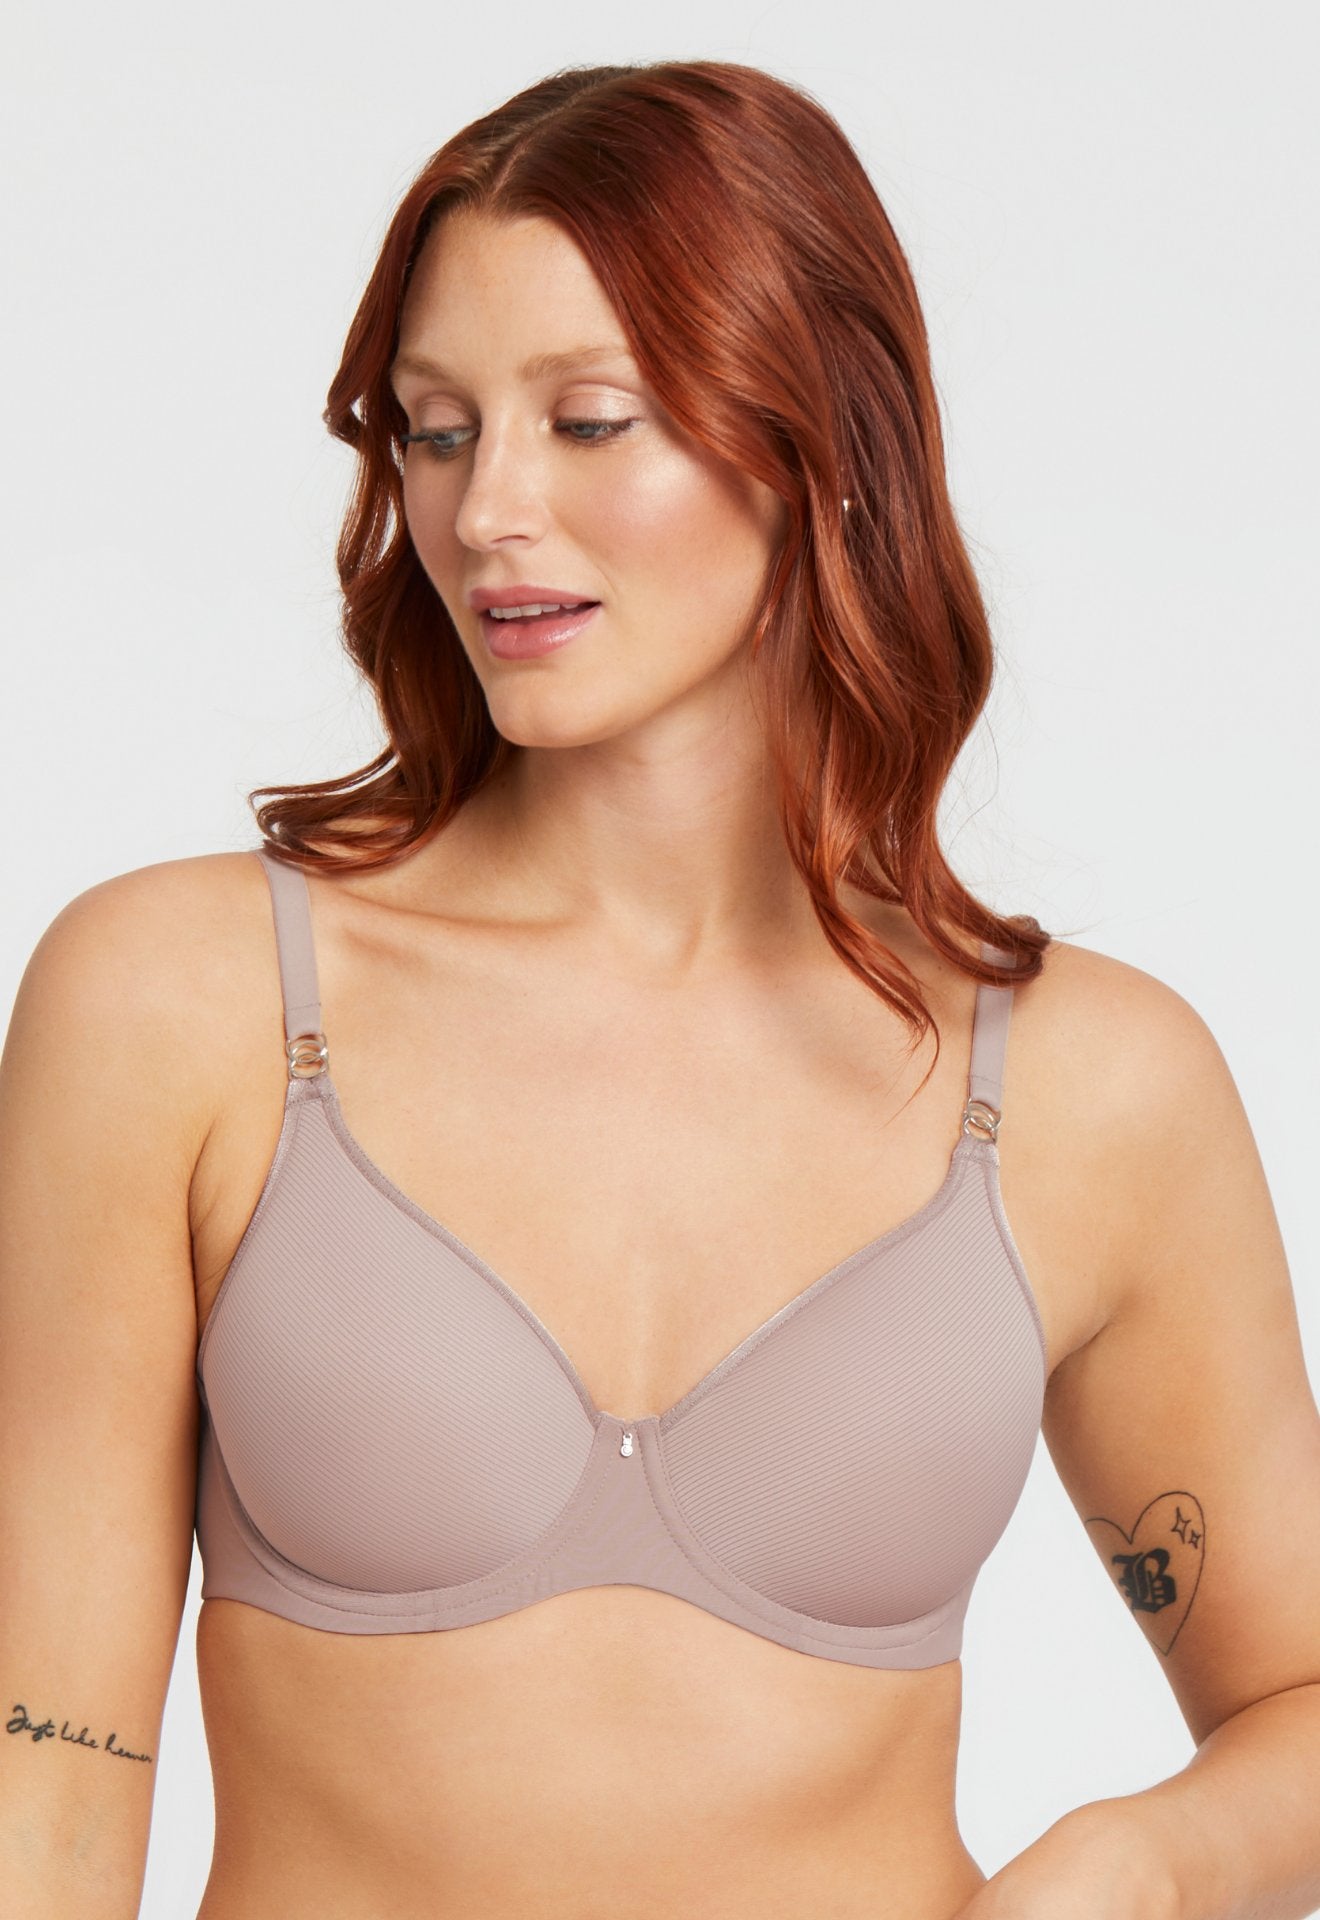 Sublime Spacer Bra Moonshell worn by model